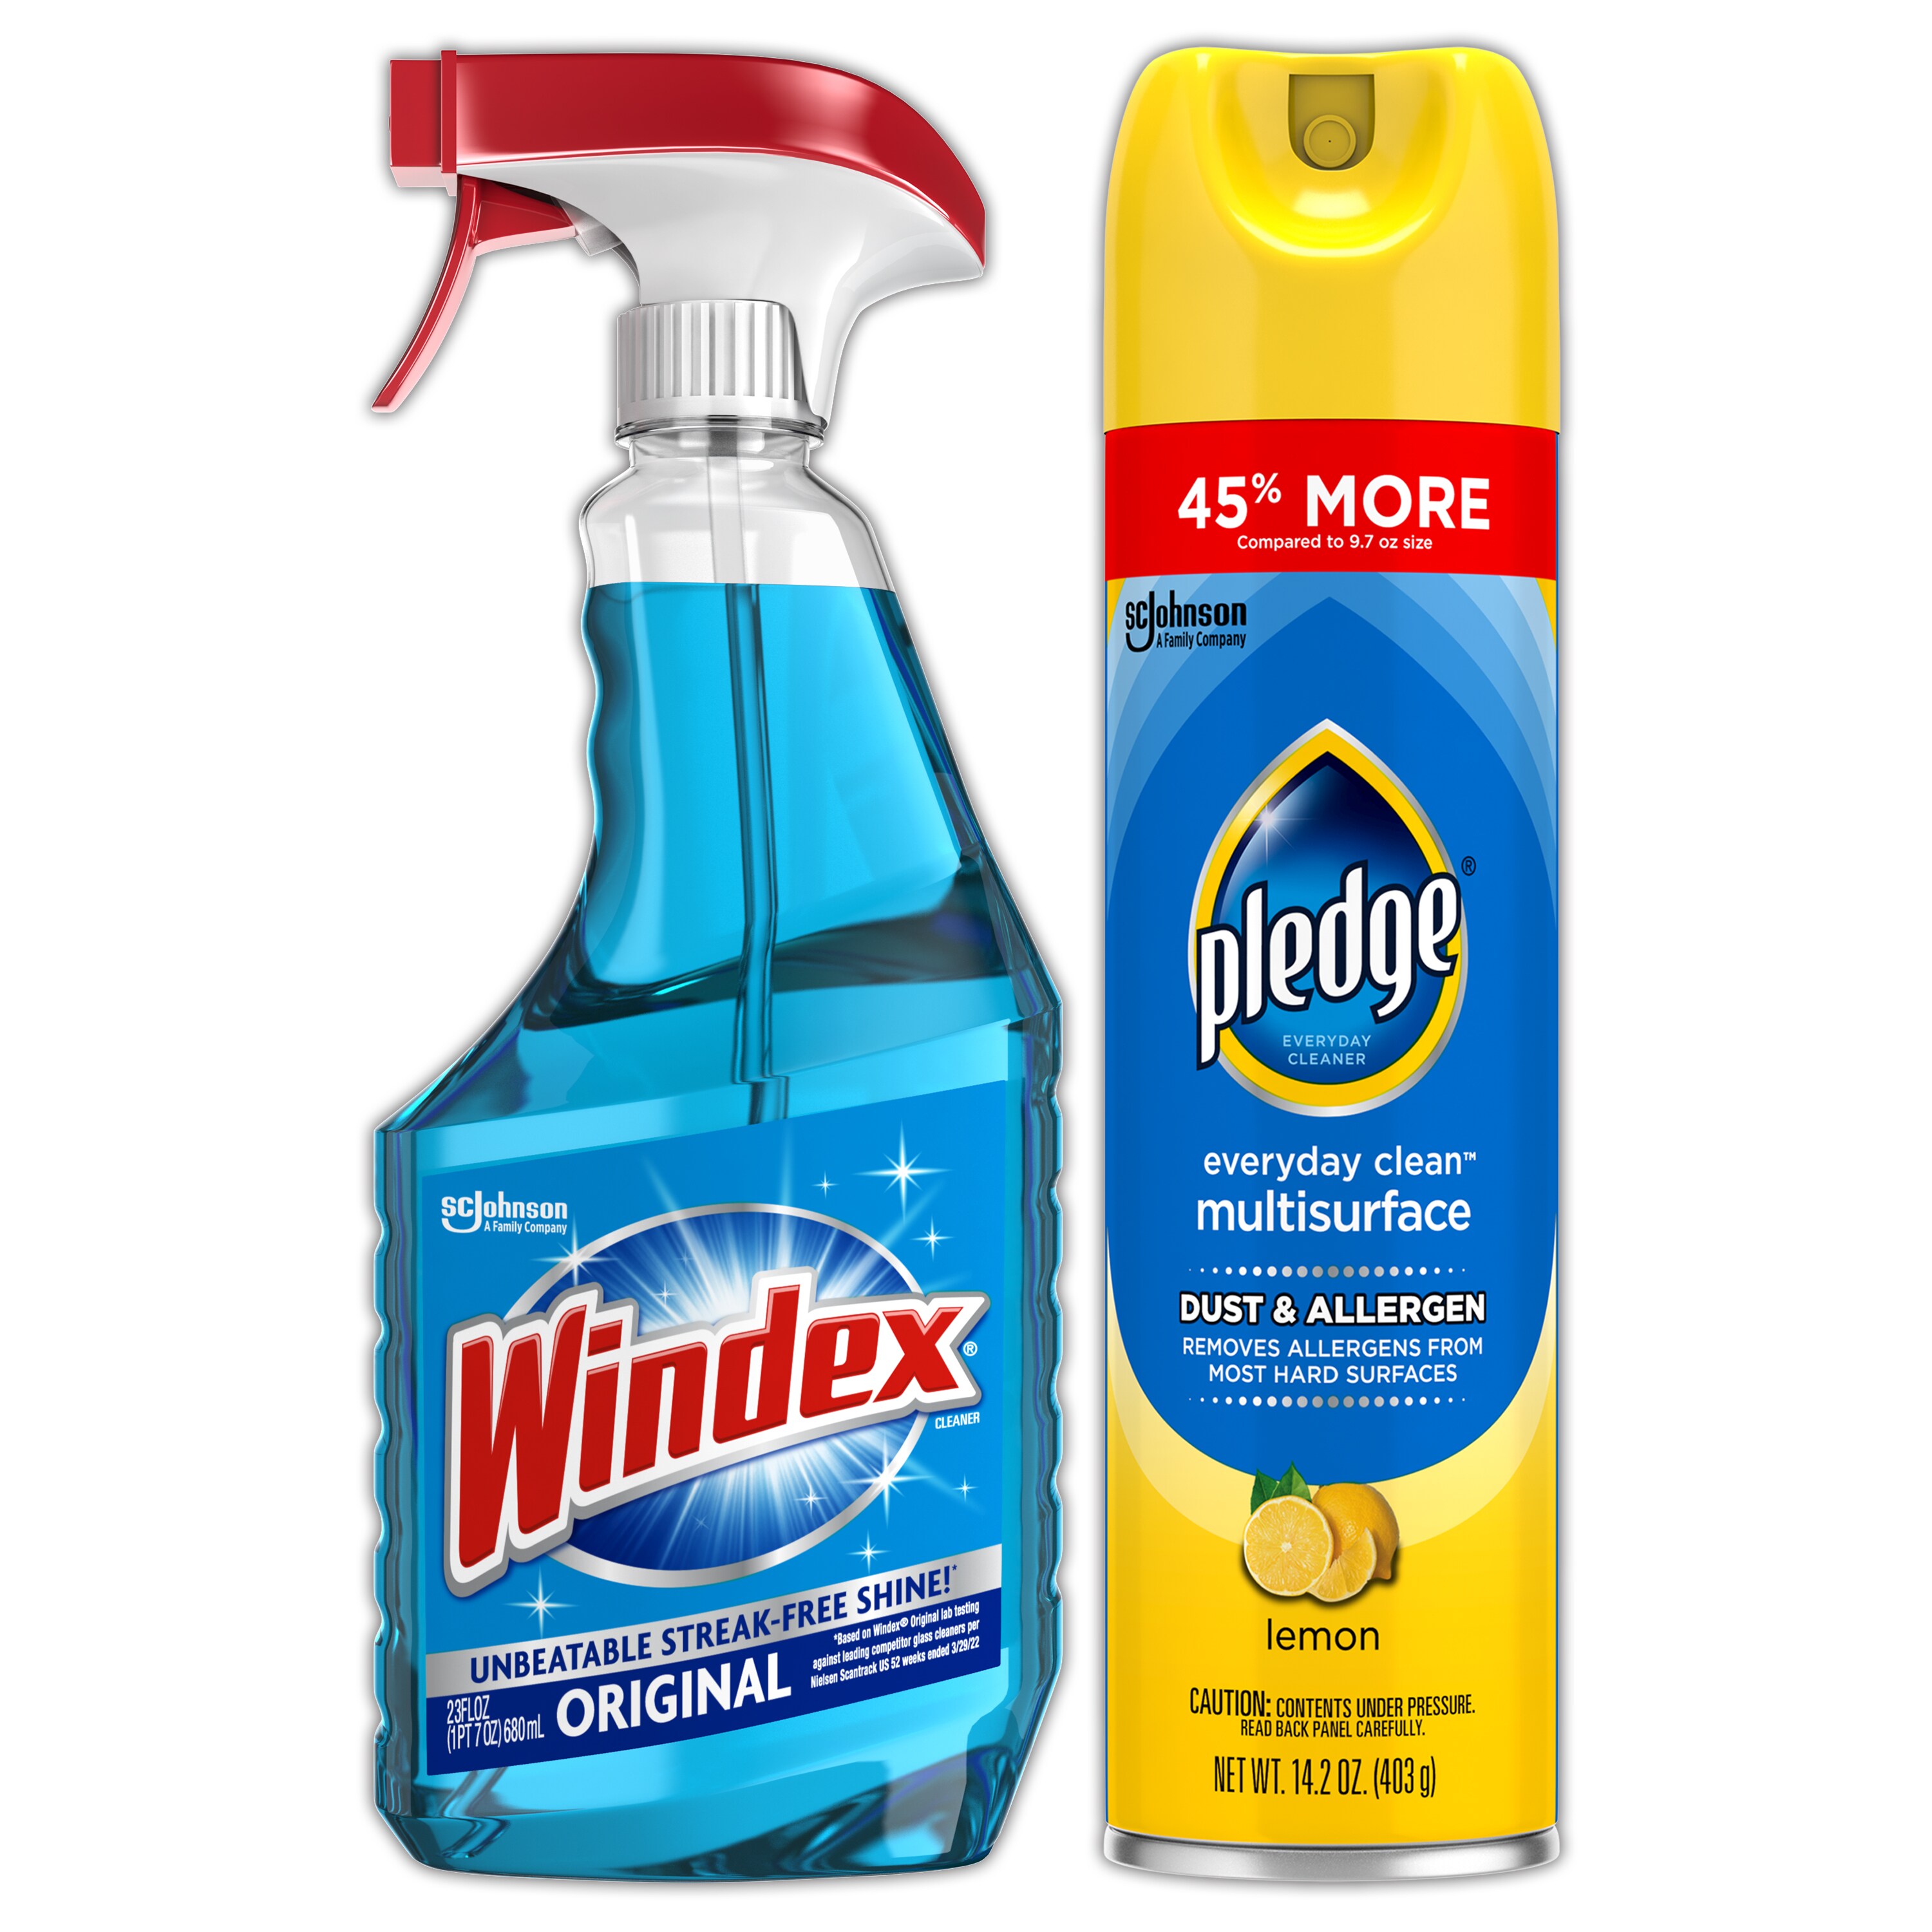 The 6 Best Alternatives to Windex Glass Cleaners - Prudent Reviews